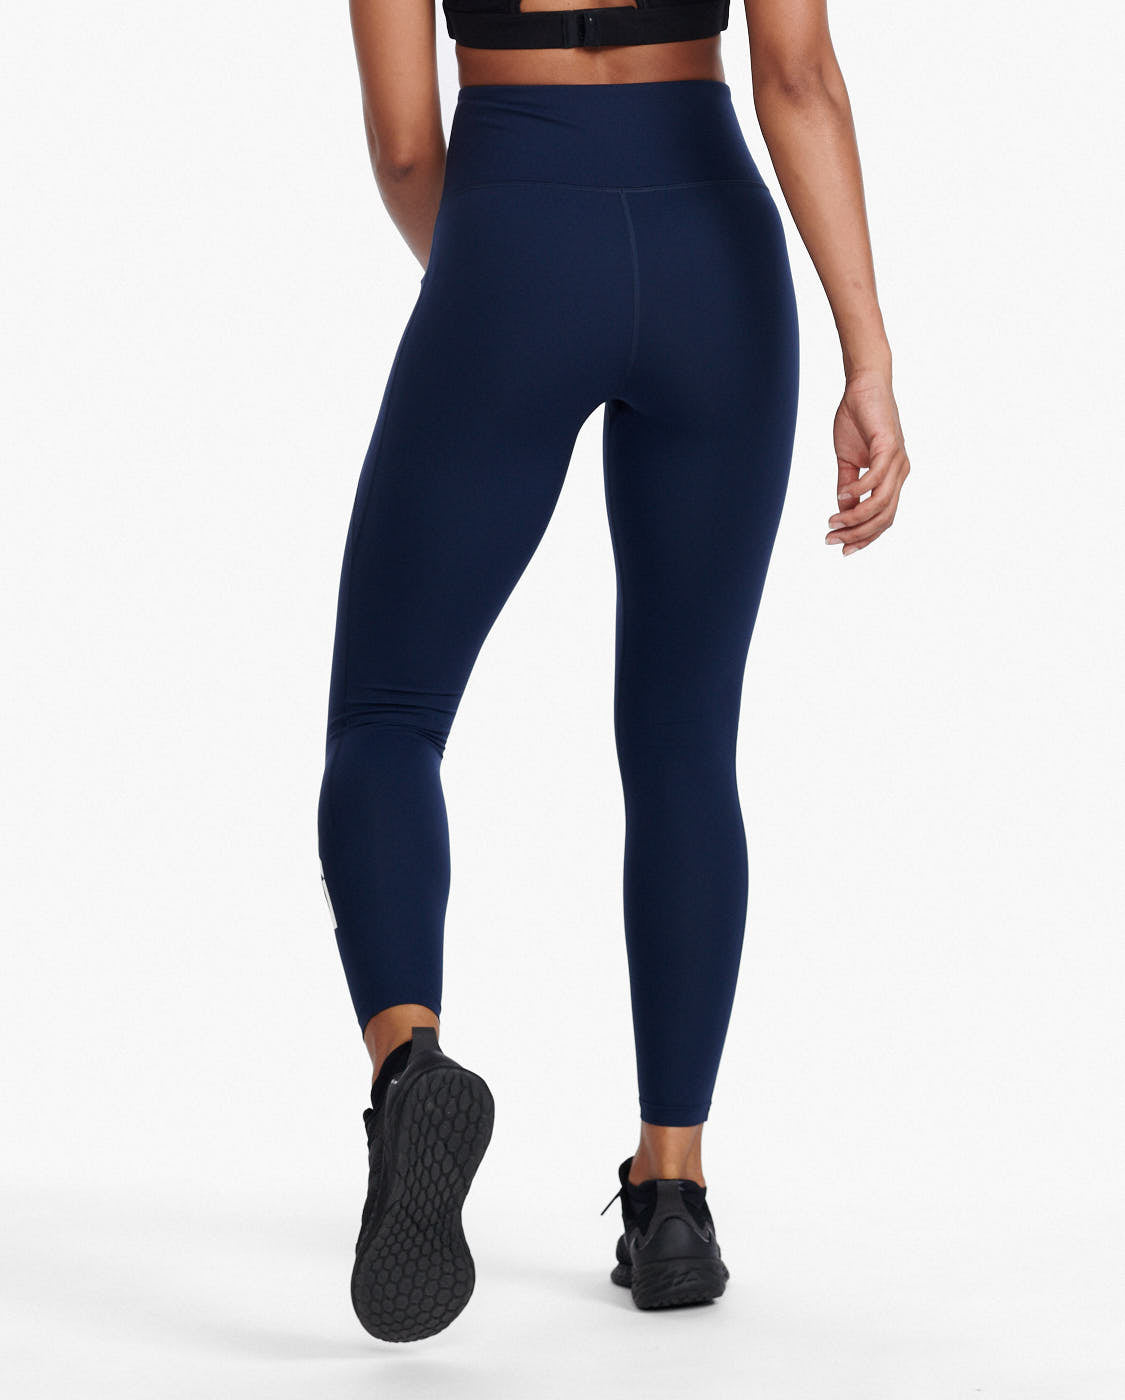 2XU  Form Stash Hi-Rise Compression Tights 2.0 Women's - The Derby Runner